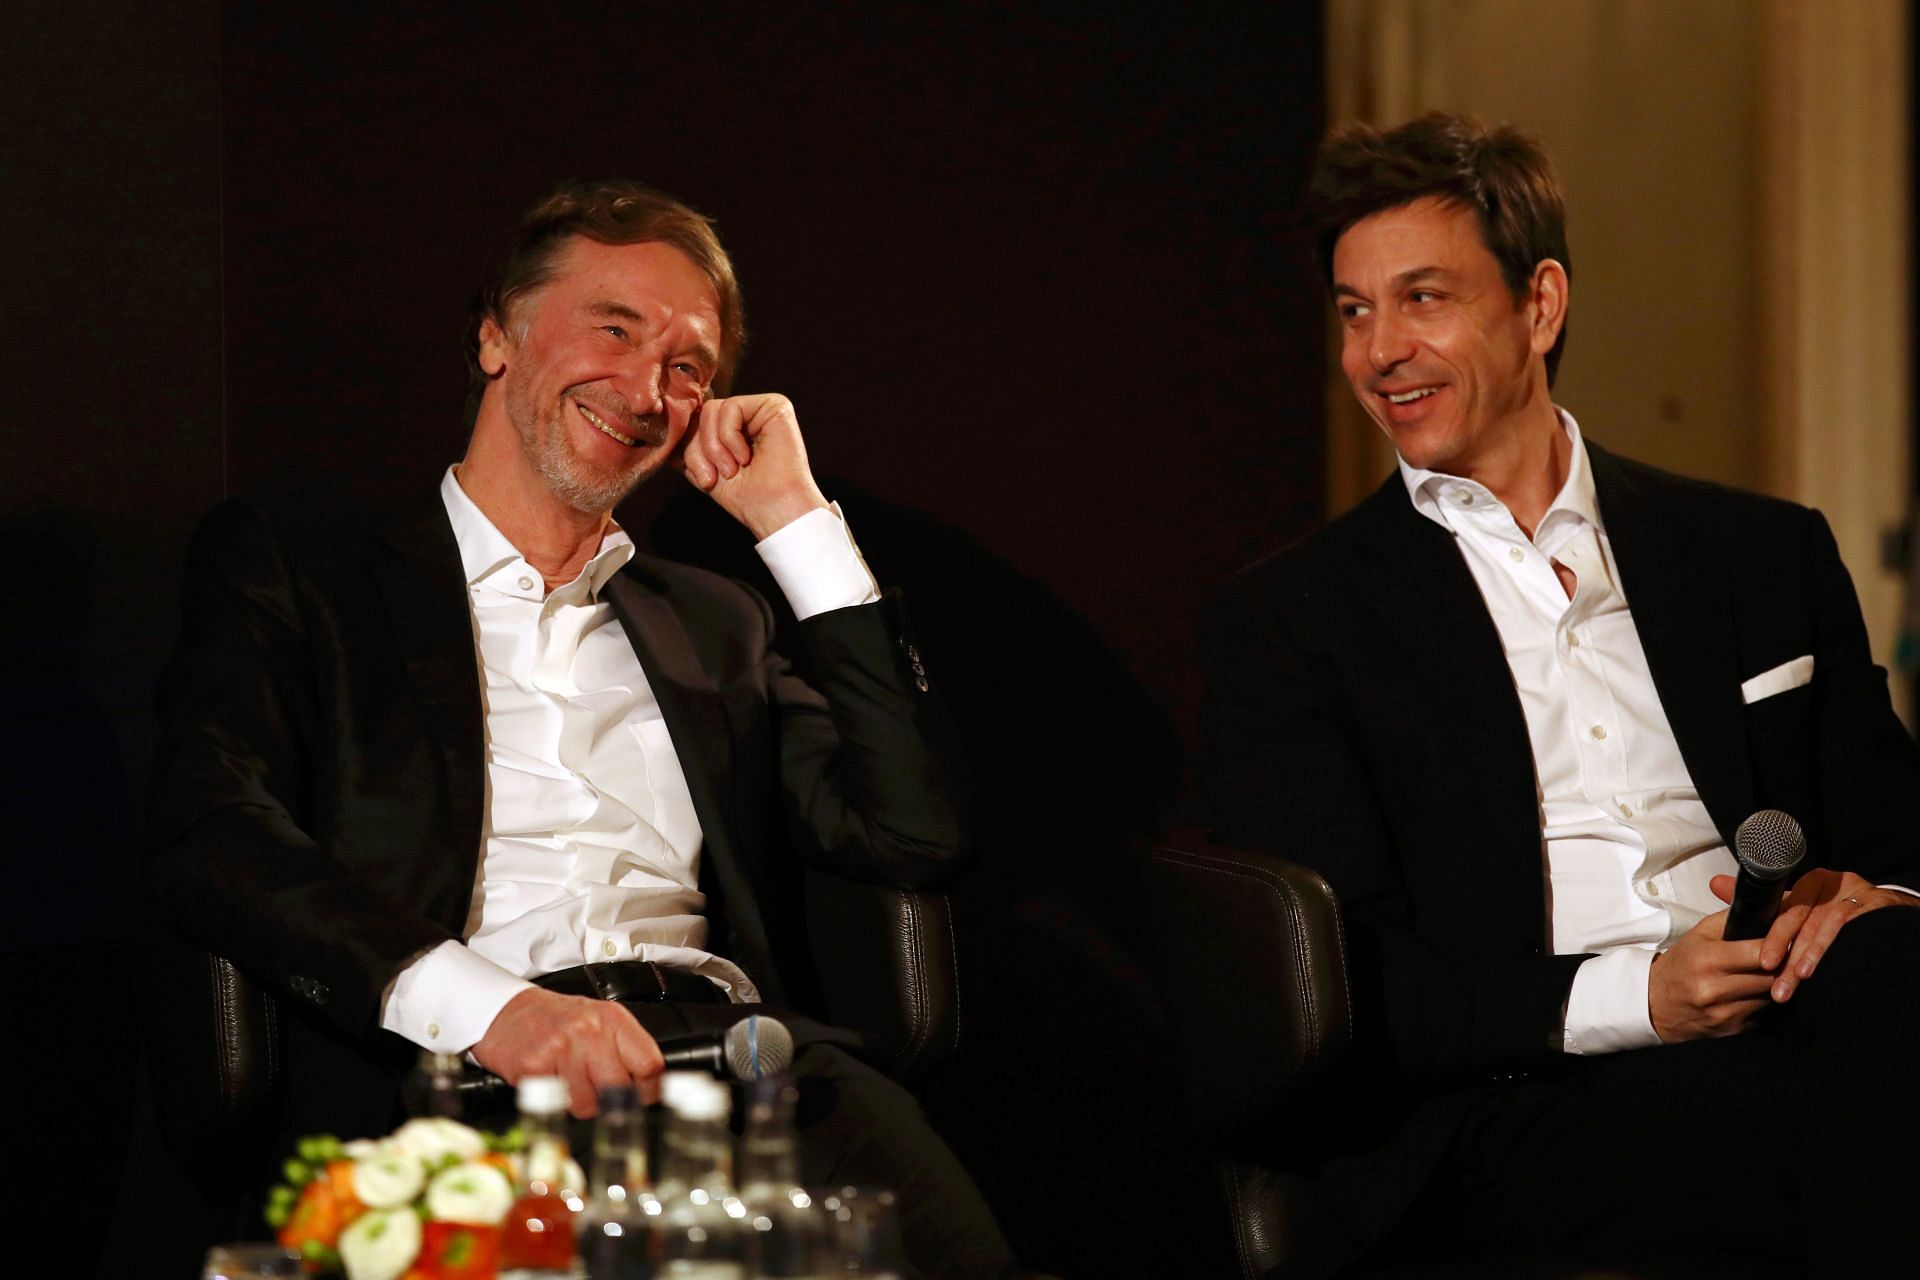 Sir Jim Ratcliffe (left) wants Manchester United to find the next Kylian Mbappe.